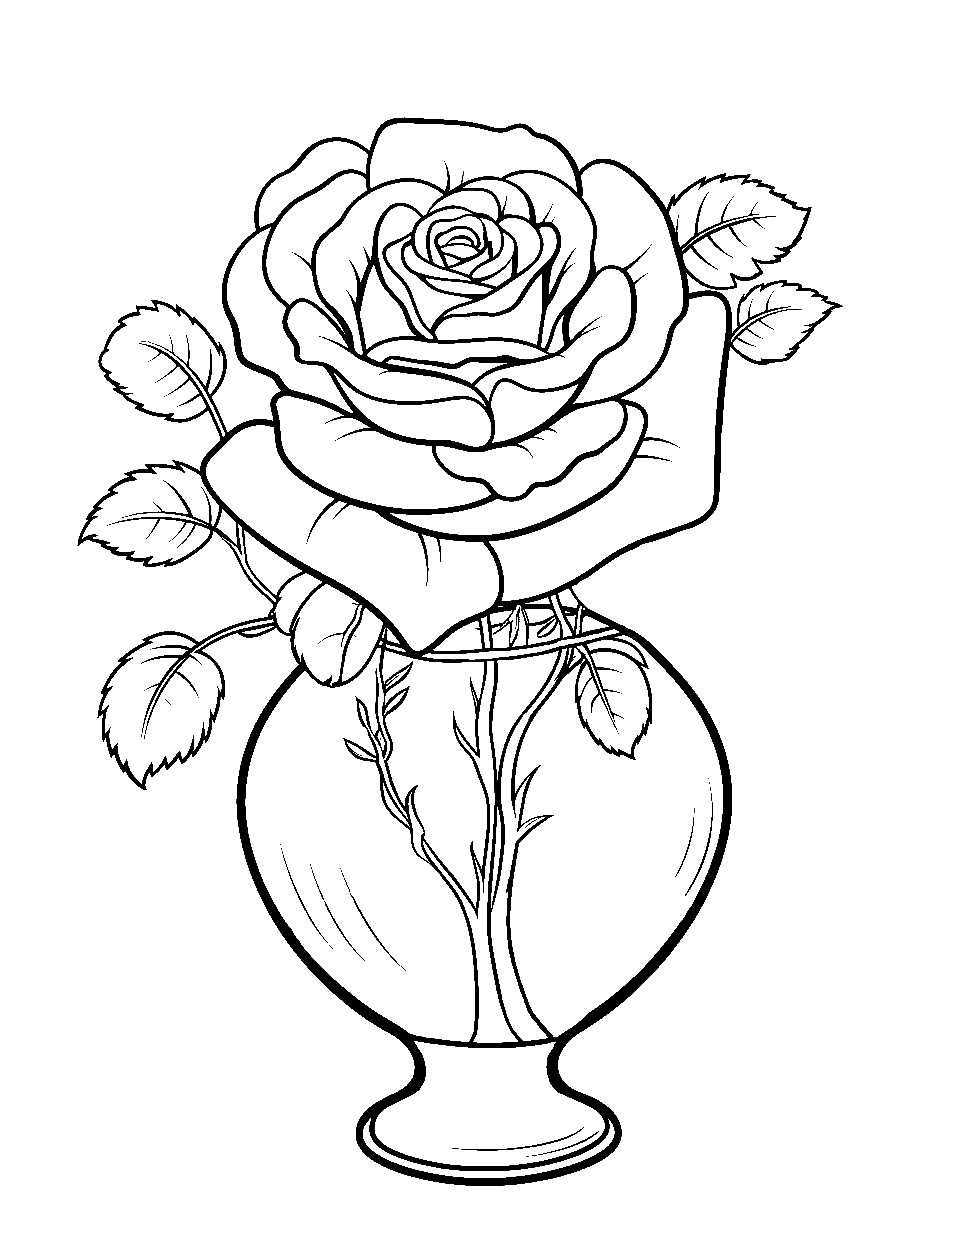 Rose in a Crystal Vase Coloring Page - A single rose placed in a crystal vase symbolizing simplicity and elegance.